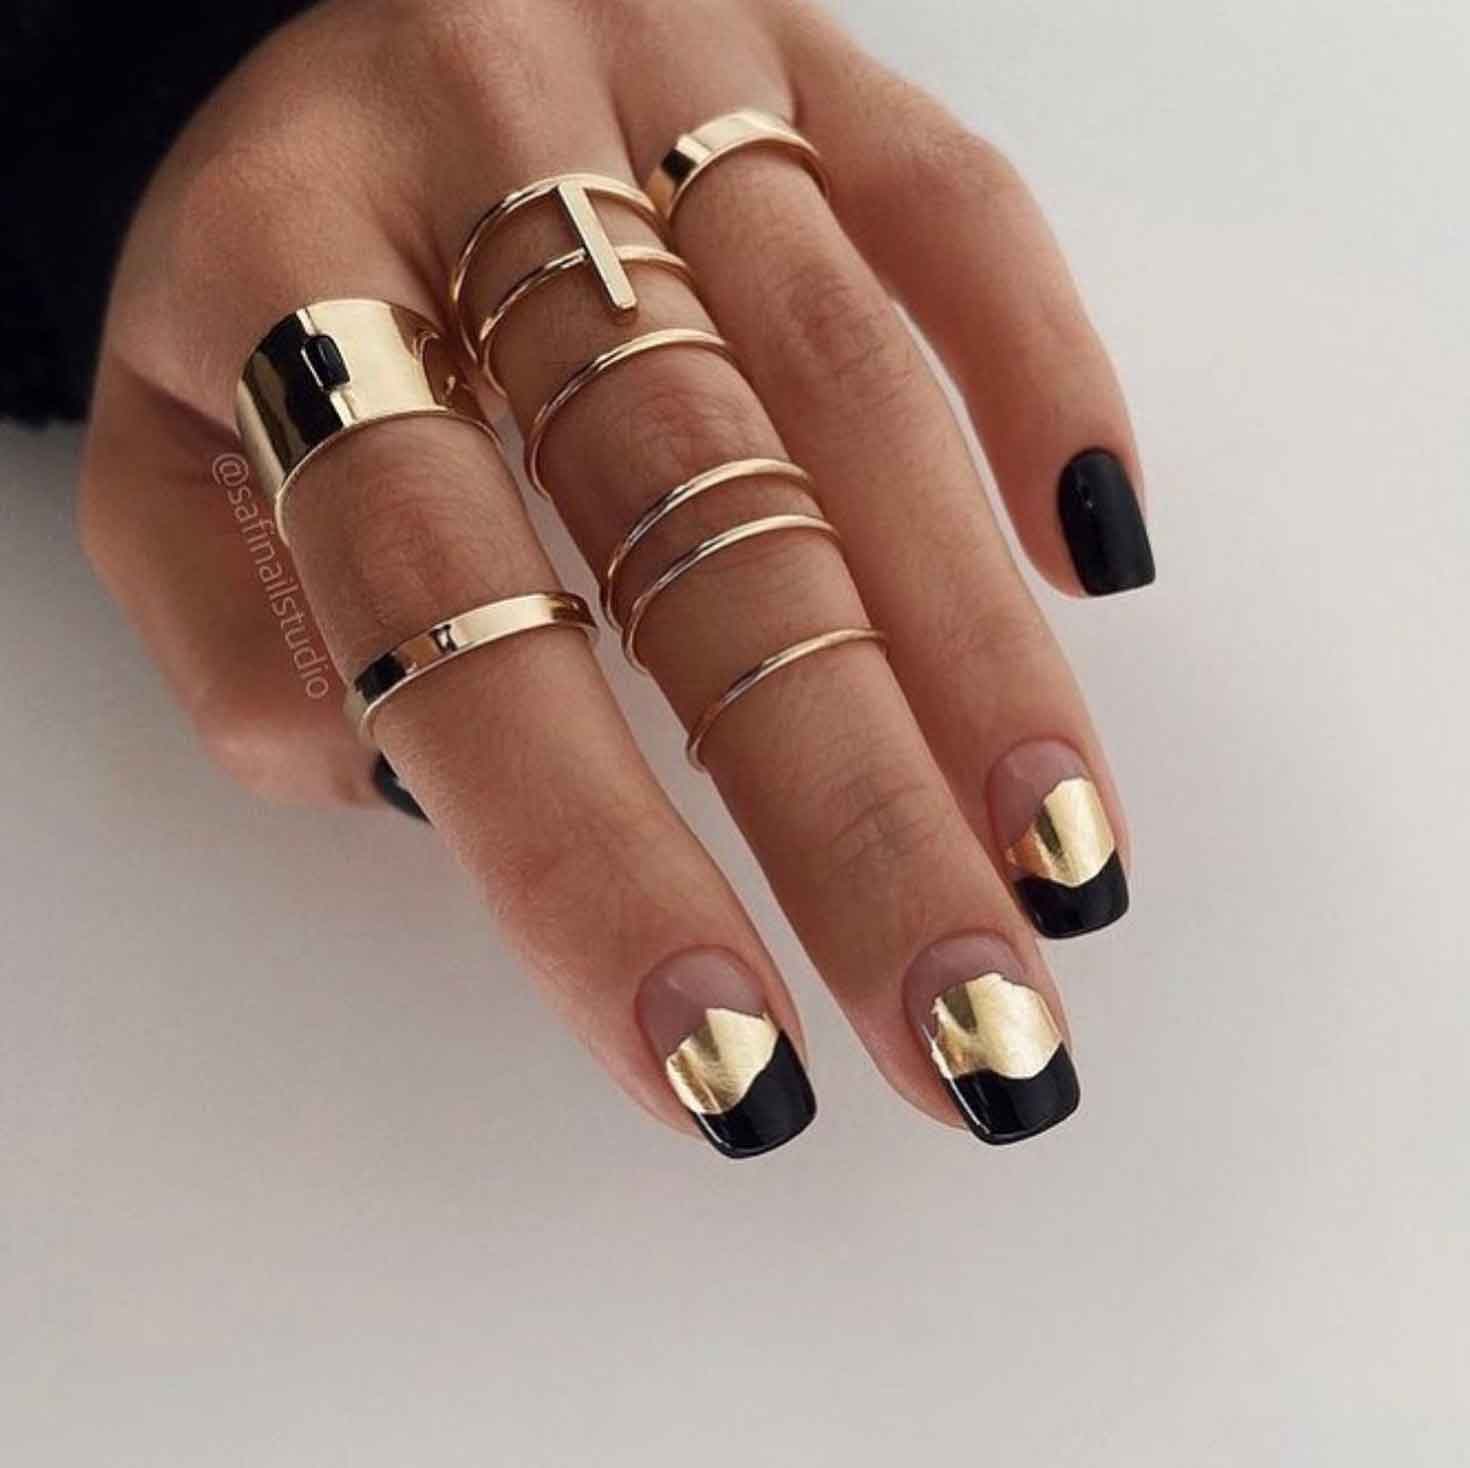 A woman with black and gold nails - Nails